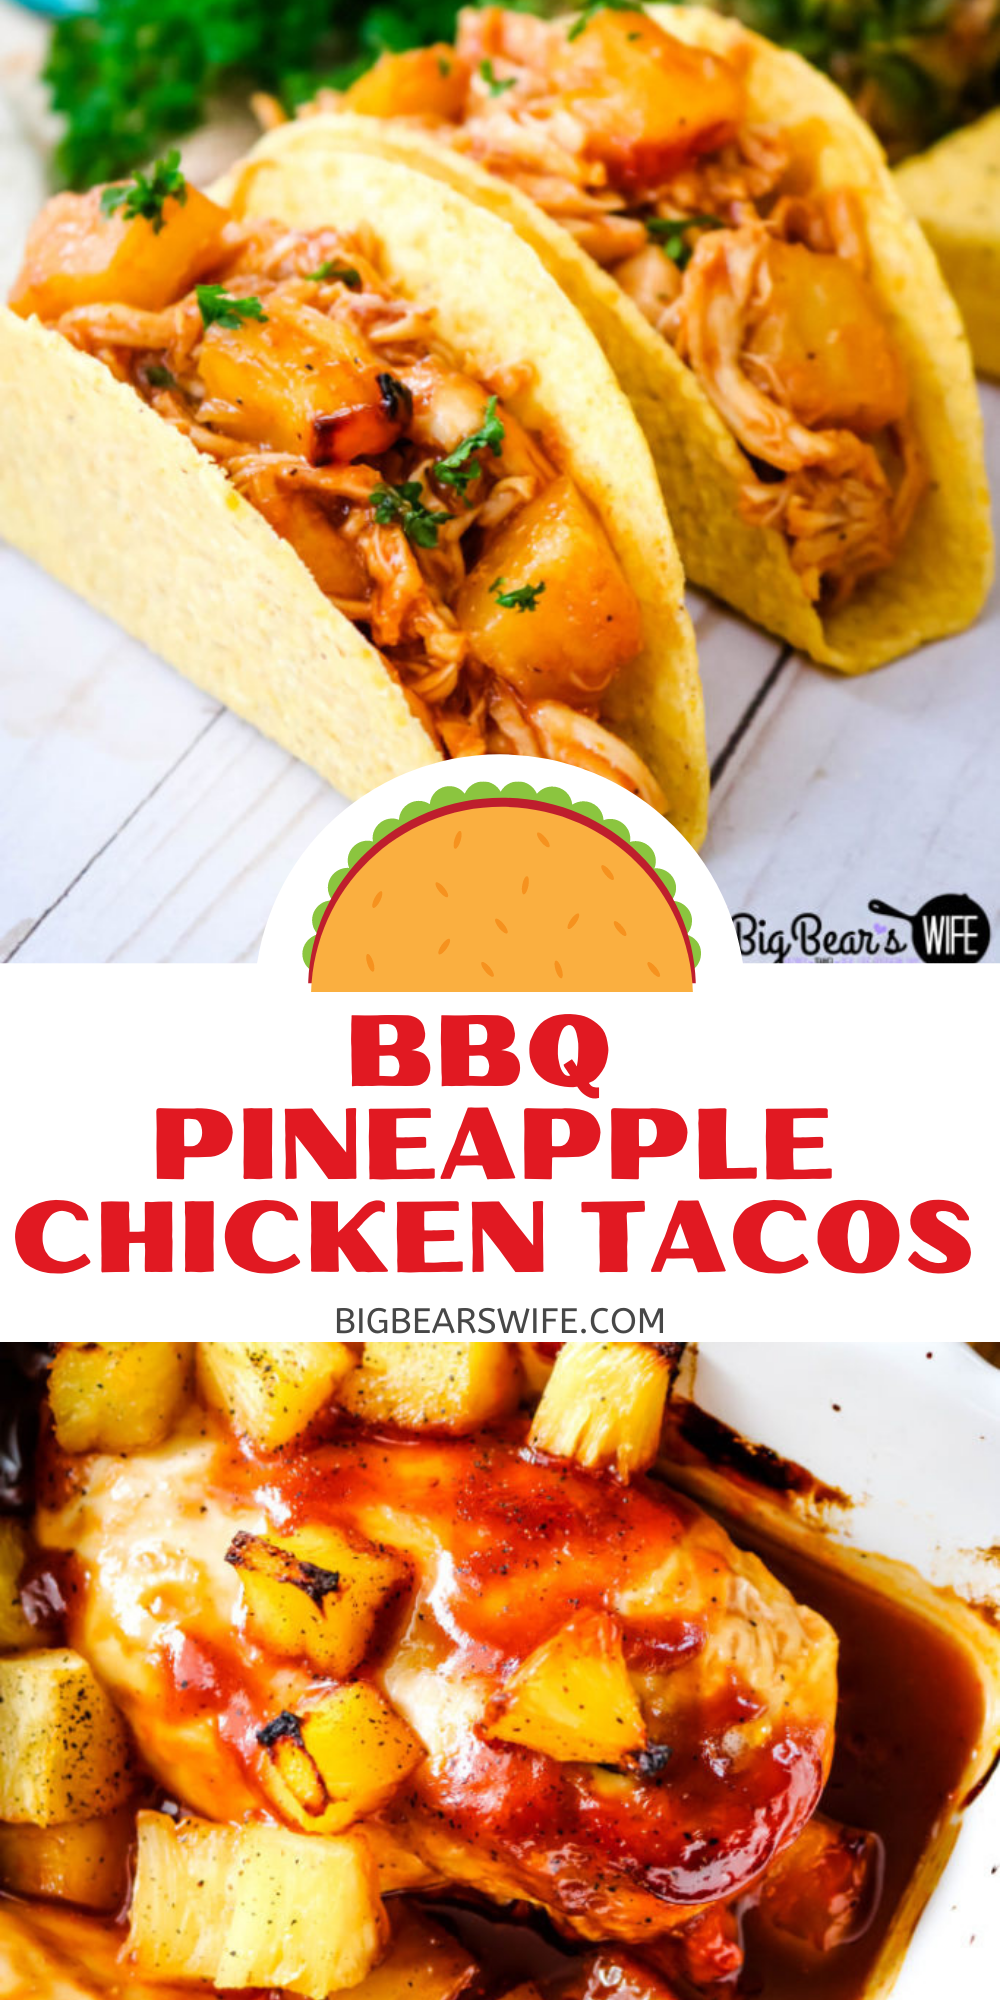 BBQ Pineapple Chicken Tacos - Easy Baked BBQ Pineapple Chicken makes fantastic BBQ Pineapple Chicken Tacos that are great for dinner any night of the week! Great shredded chicken tacos!  via @bigbearswife